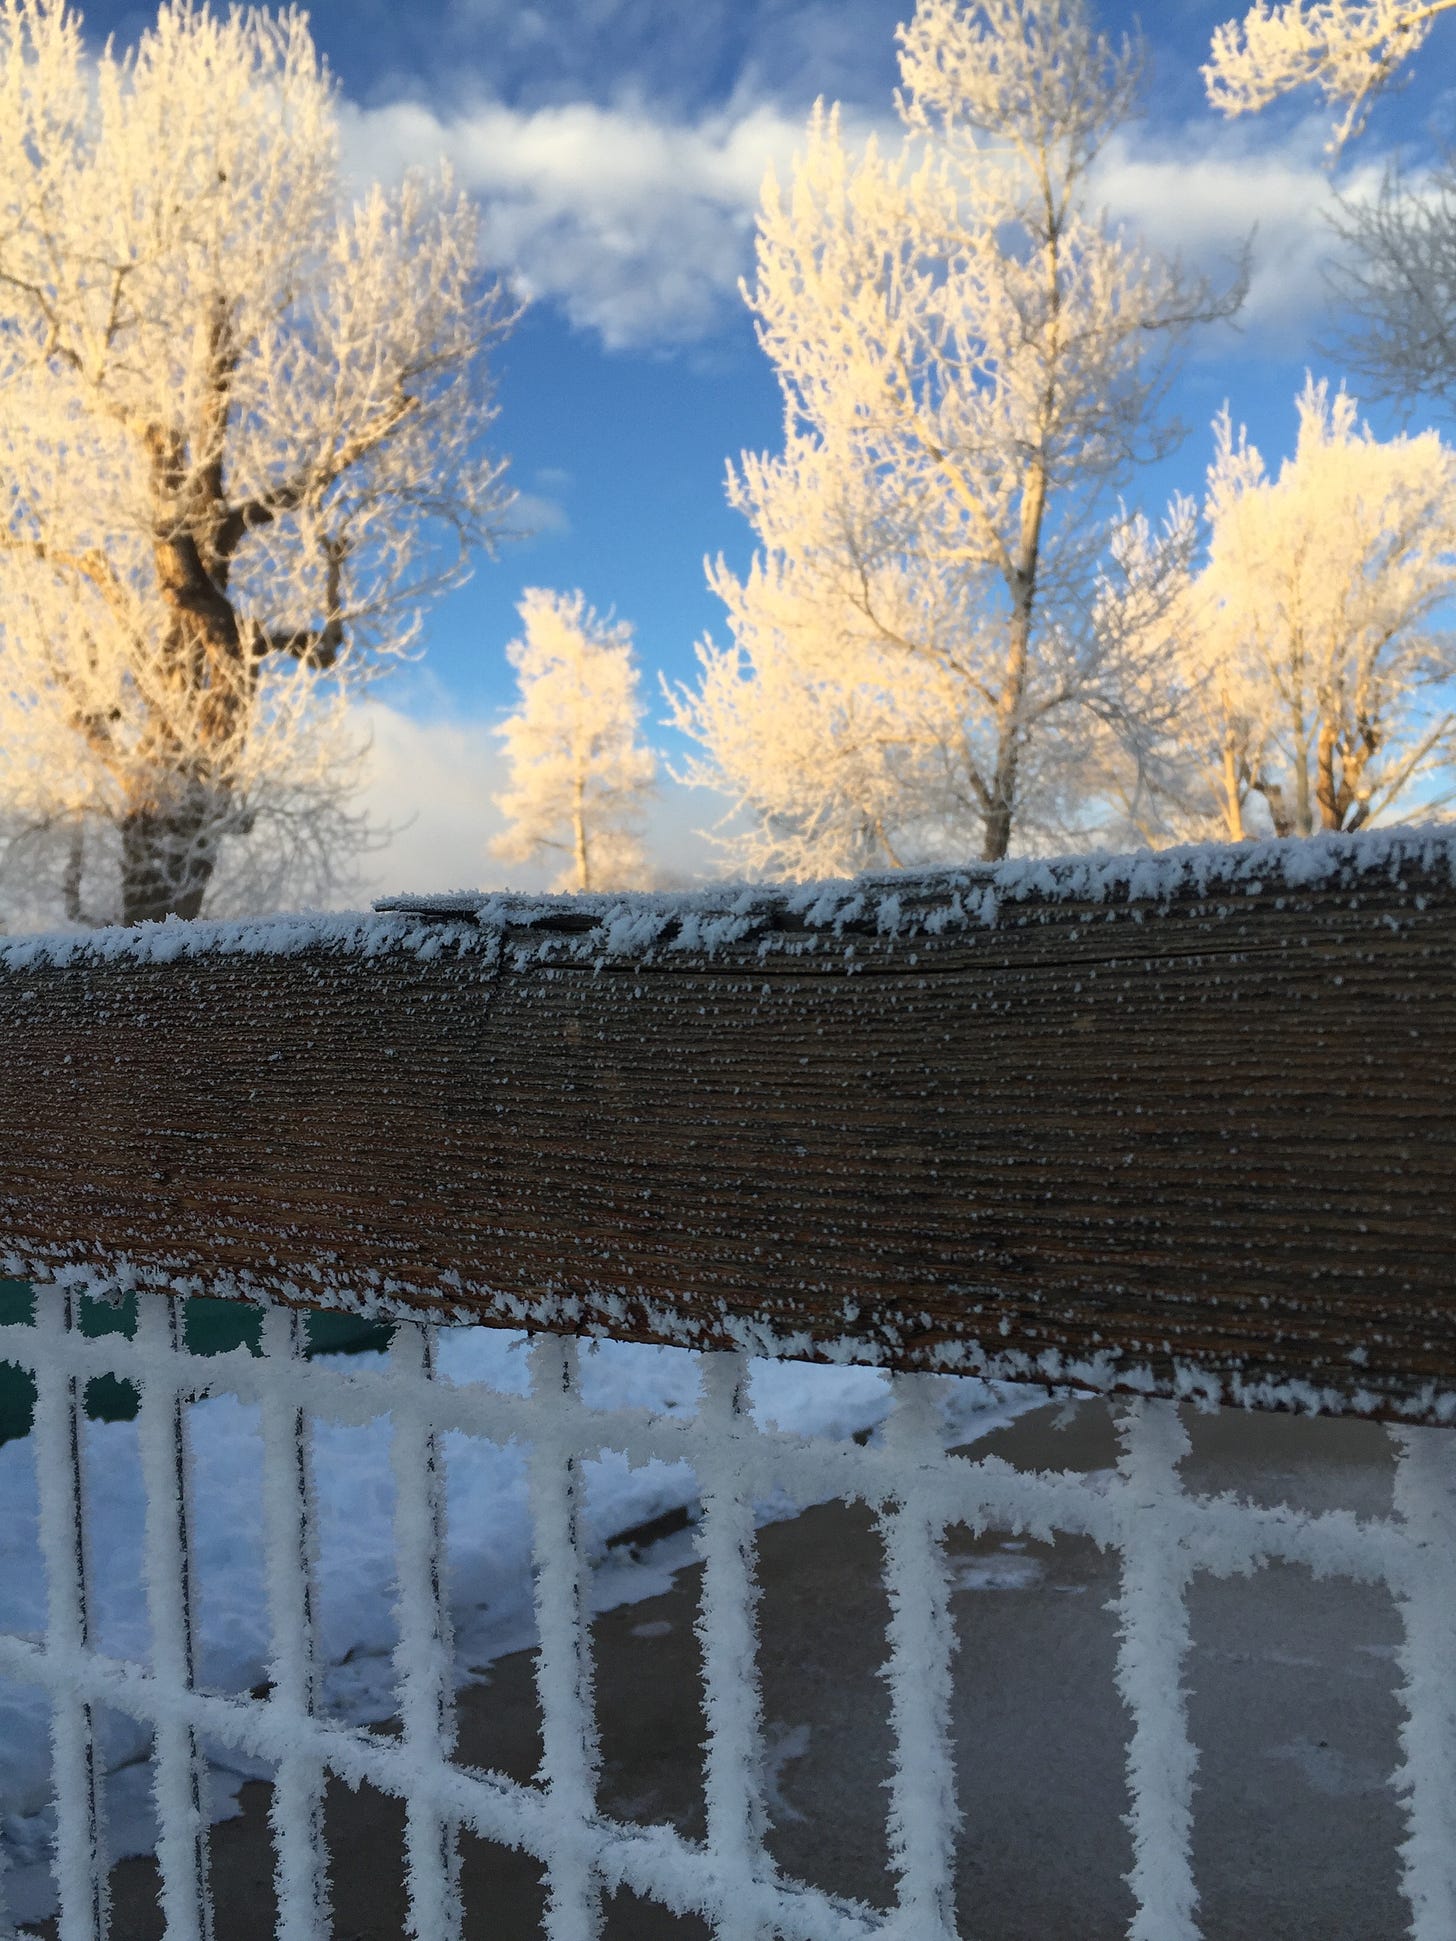 Blue sky and clouds behind frost covered tree branches and frost-covered fence wire.